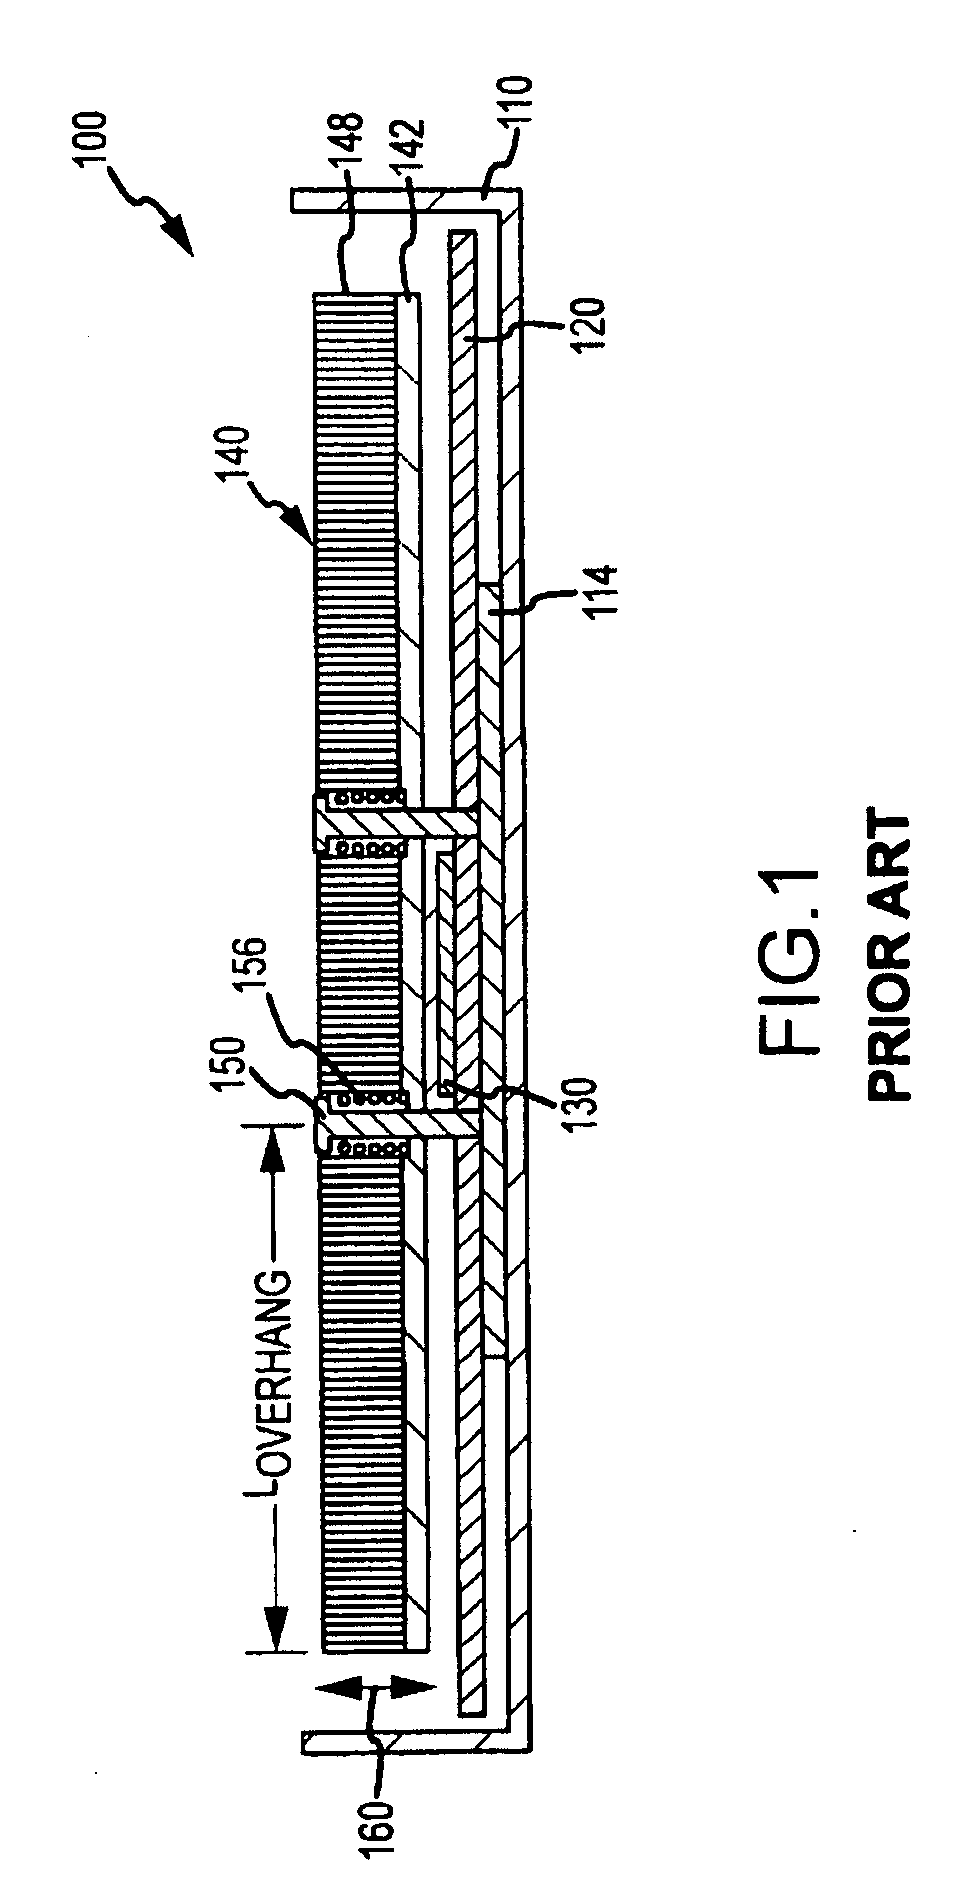 Heat Sink Mount for Providing Non-Rigid Support of Overhanging Portions of Heat Sink